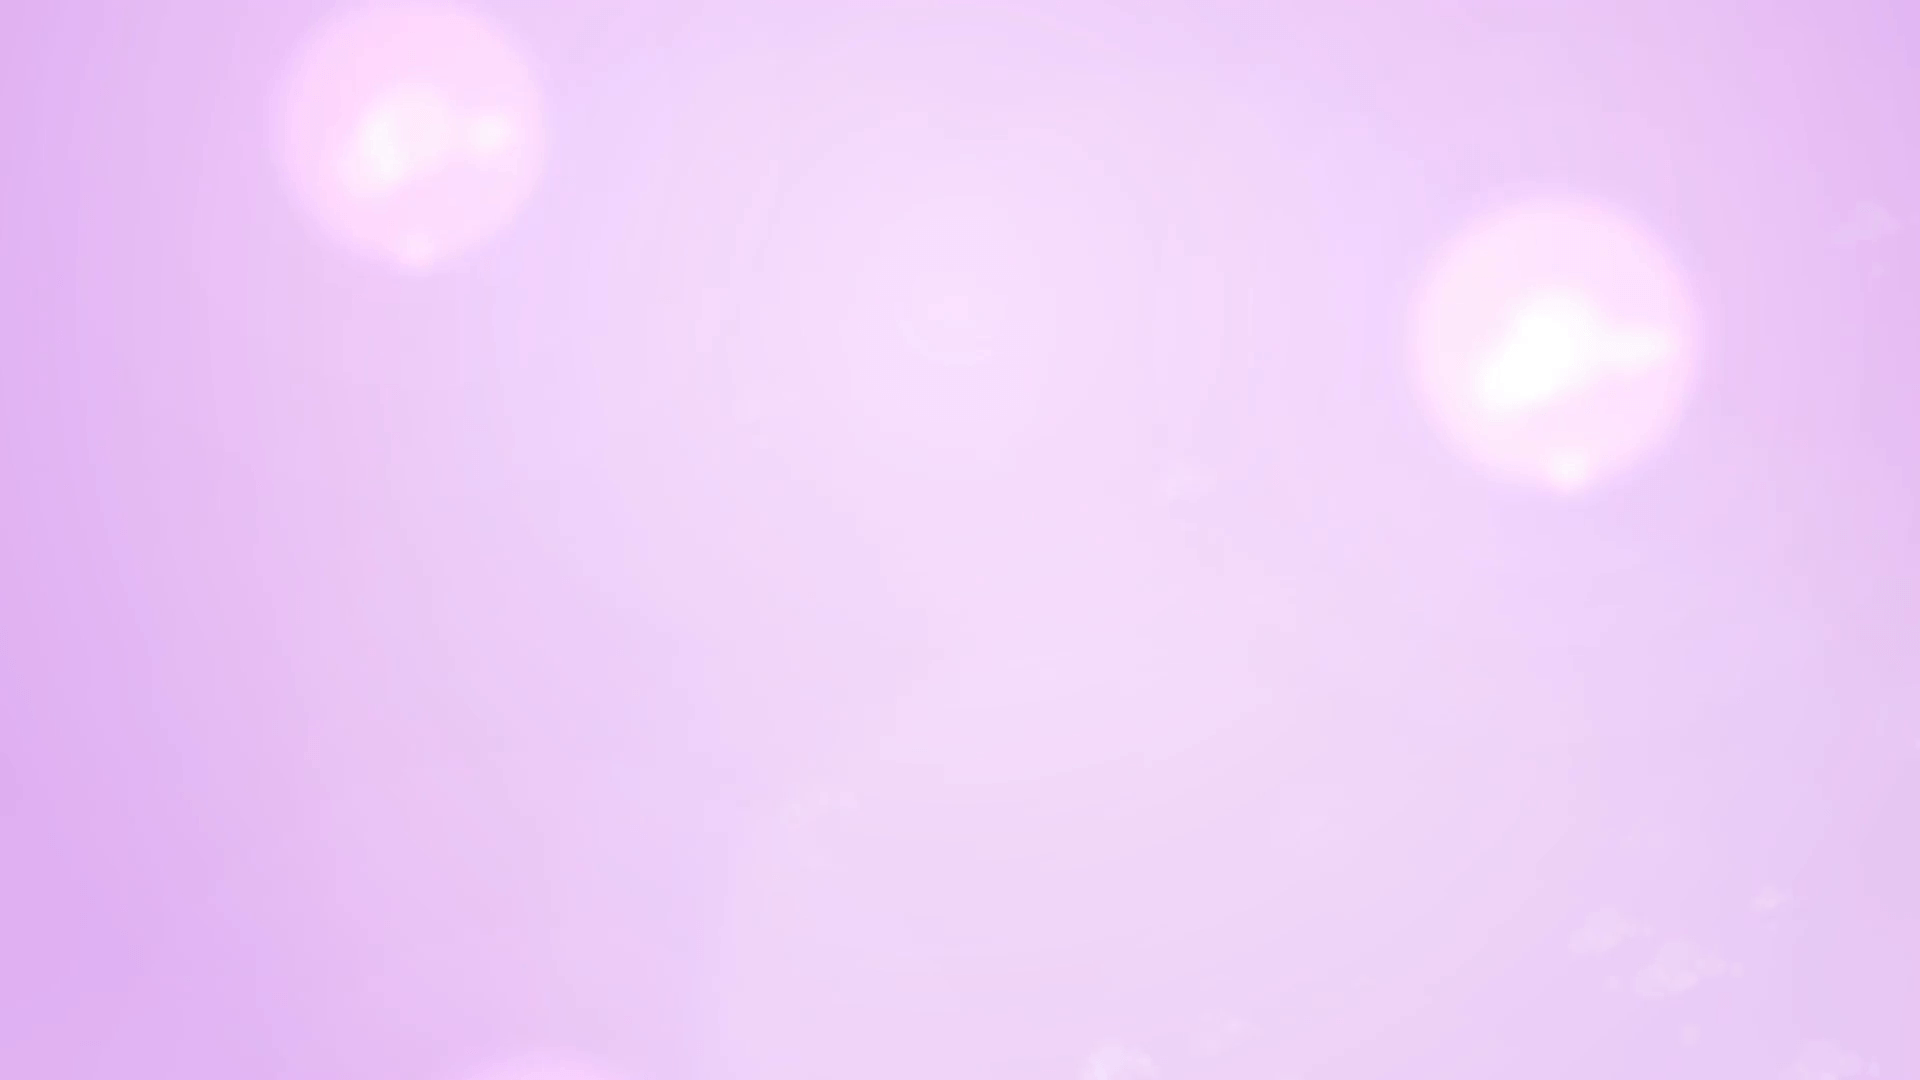 Bokeh Light Particles on Soft Pink Background as Backdrop Motion